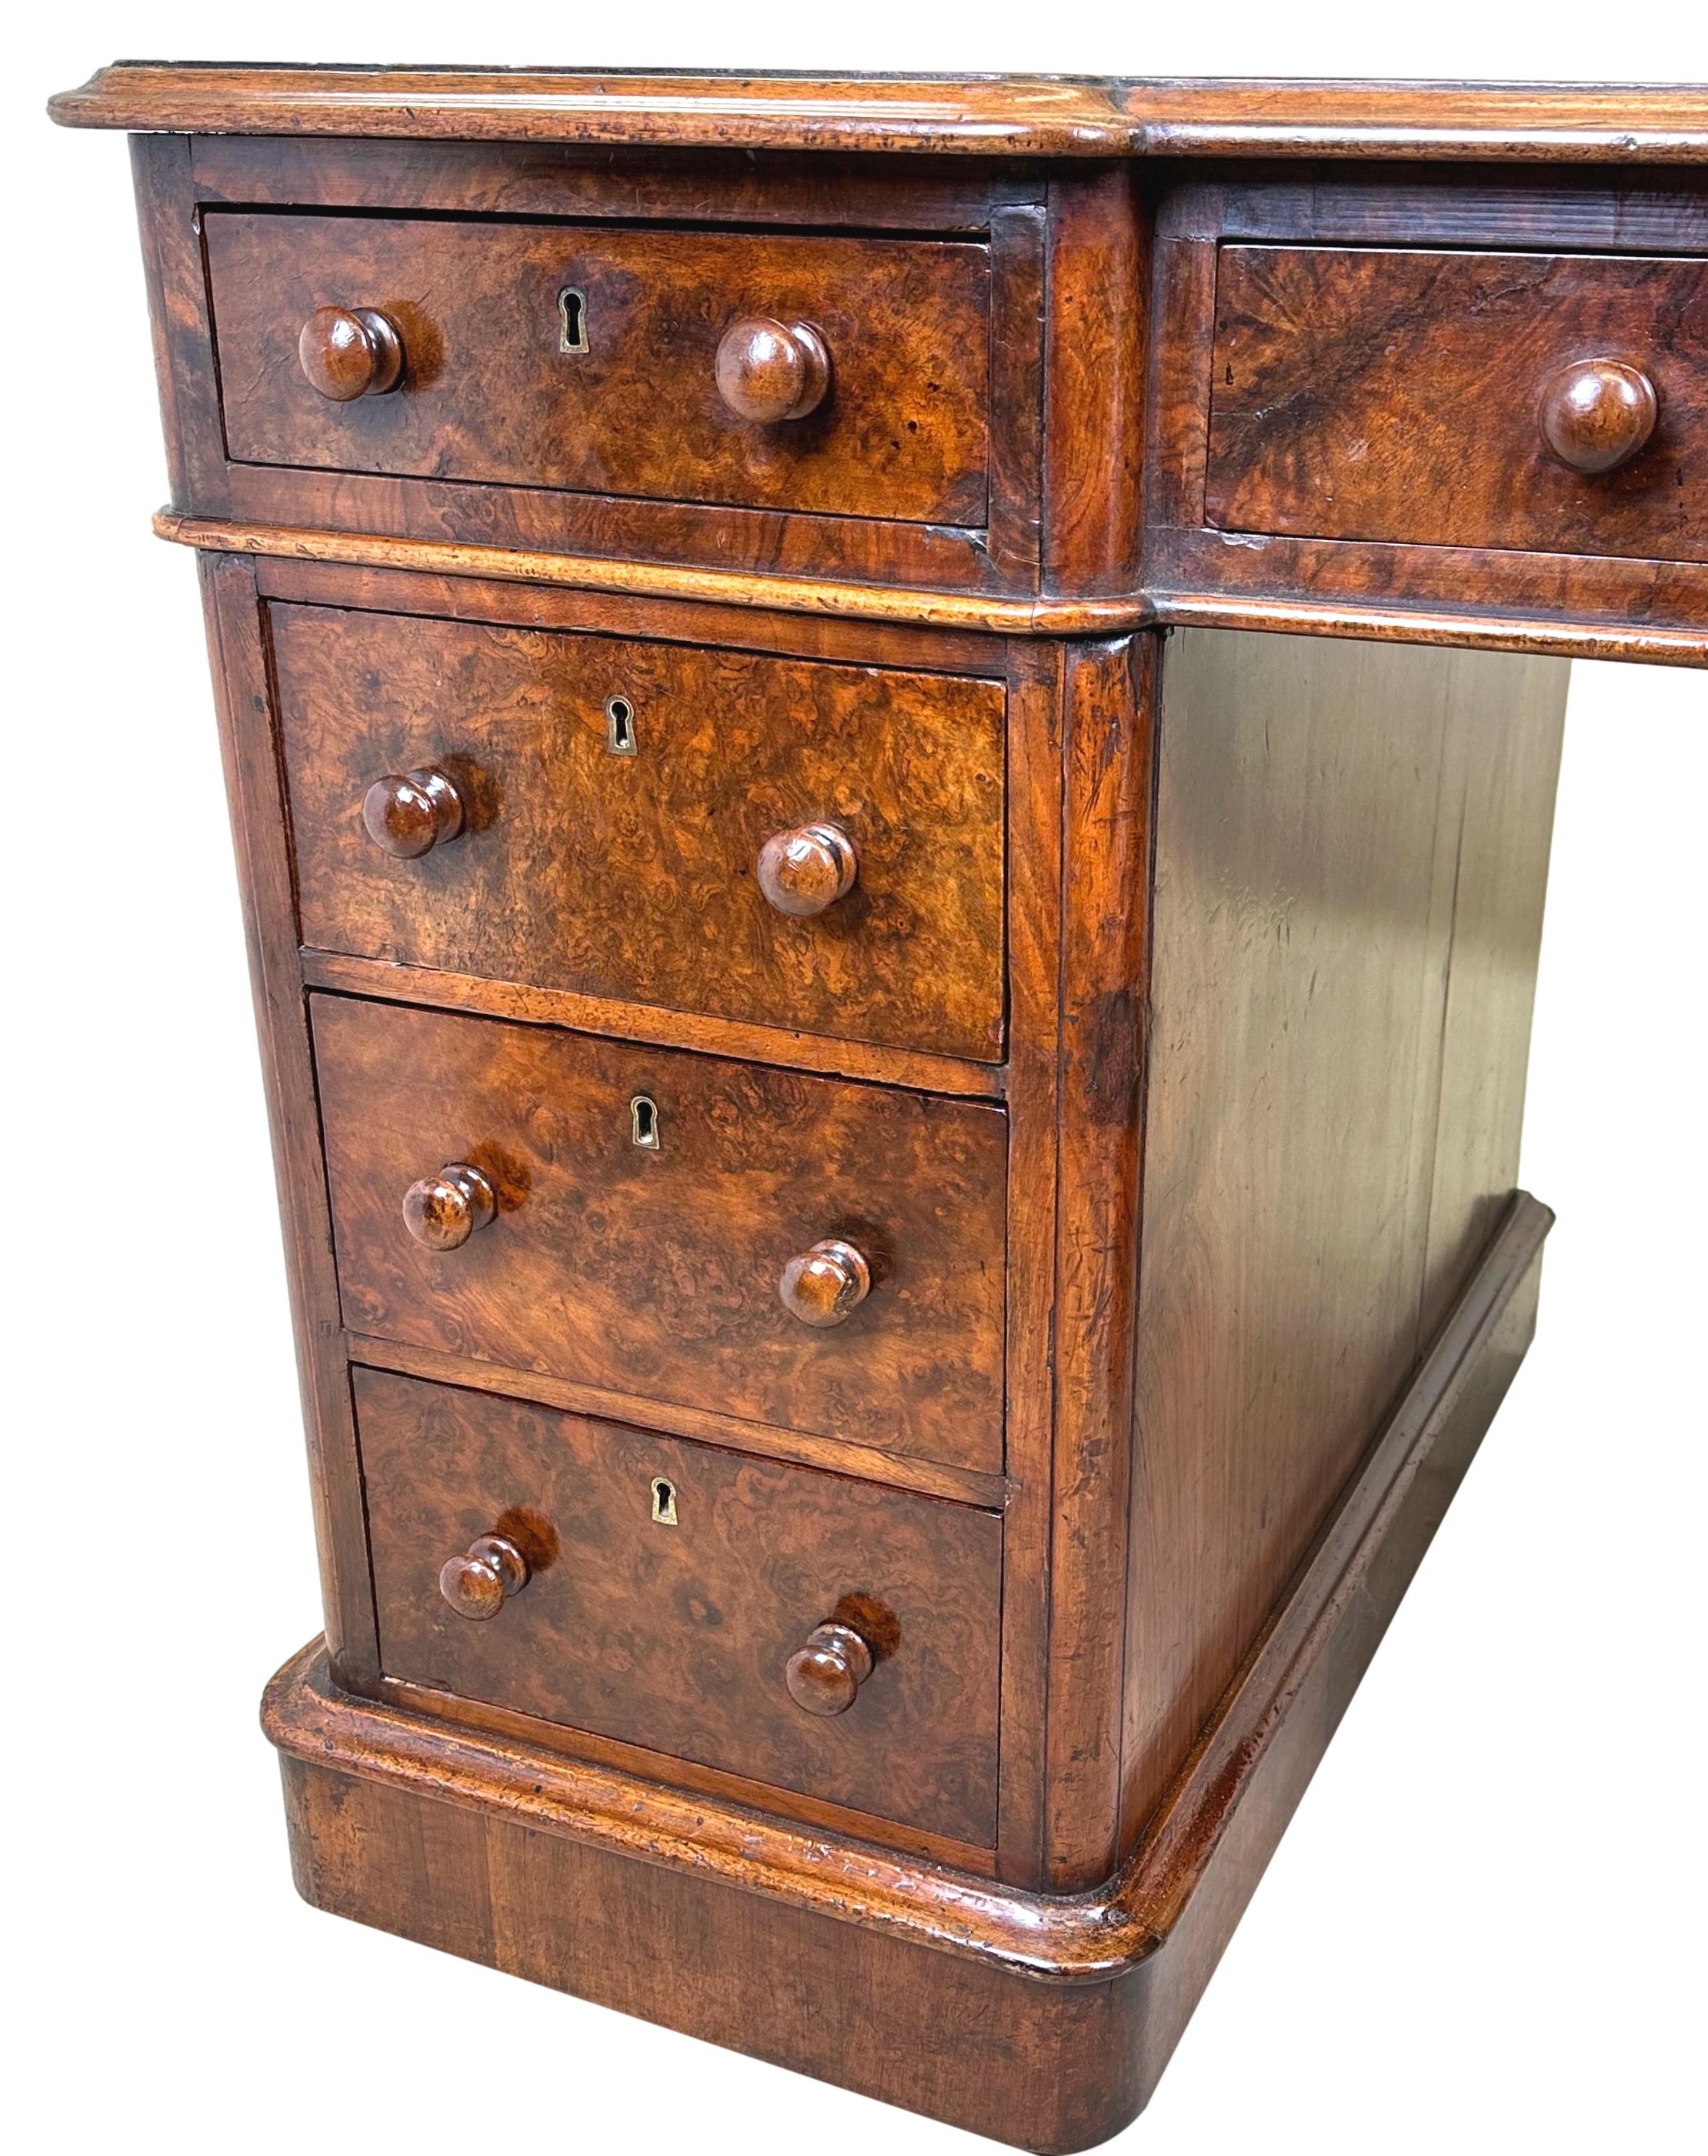 A fine quality Mid-19th Century burr walnut pedestal desk, of good proportions, having gilt tooled leather inset to inverted breakfront top, over nine drawers with original turned wooden knobs, raised on original plinth base.


A great practical